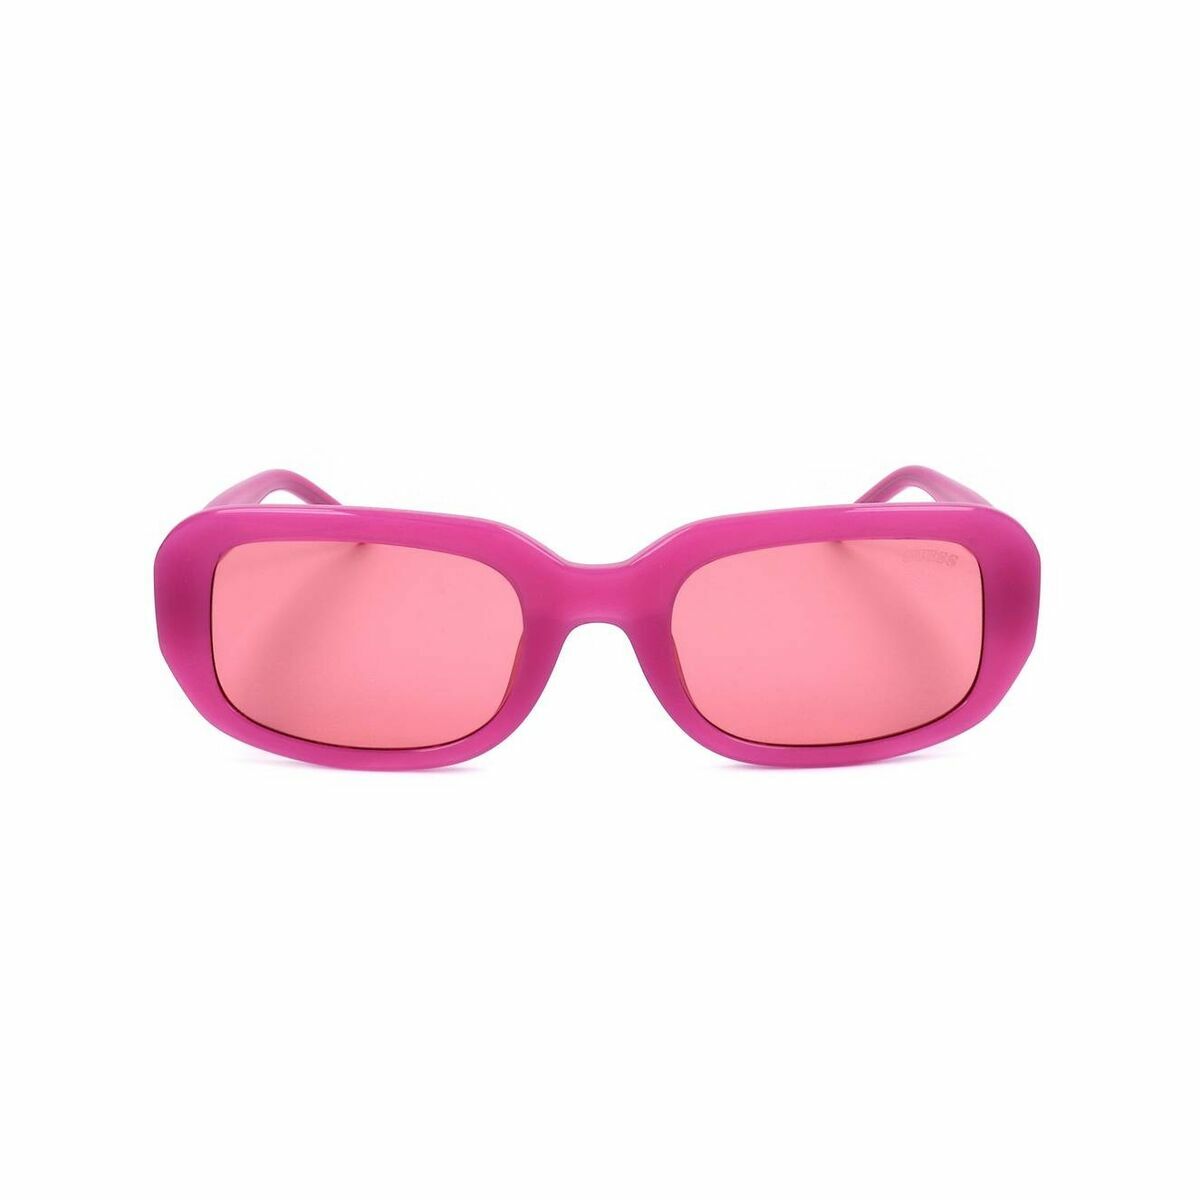 Guess Ladies' Sunglasses  Gu8250-5472s  54 Mm Gbby2 In Pink